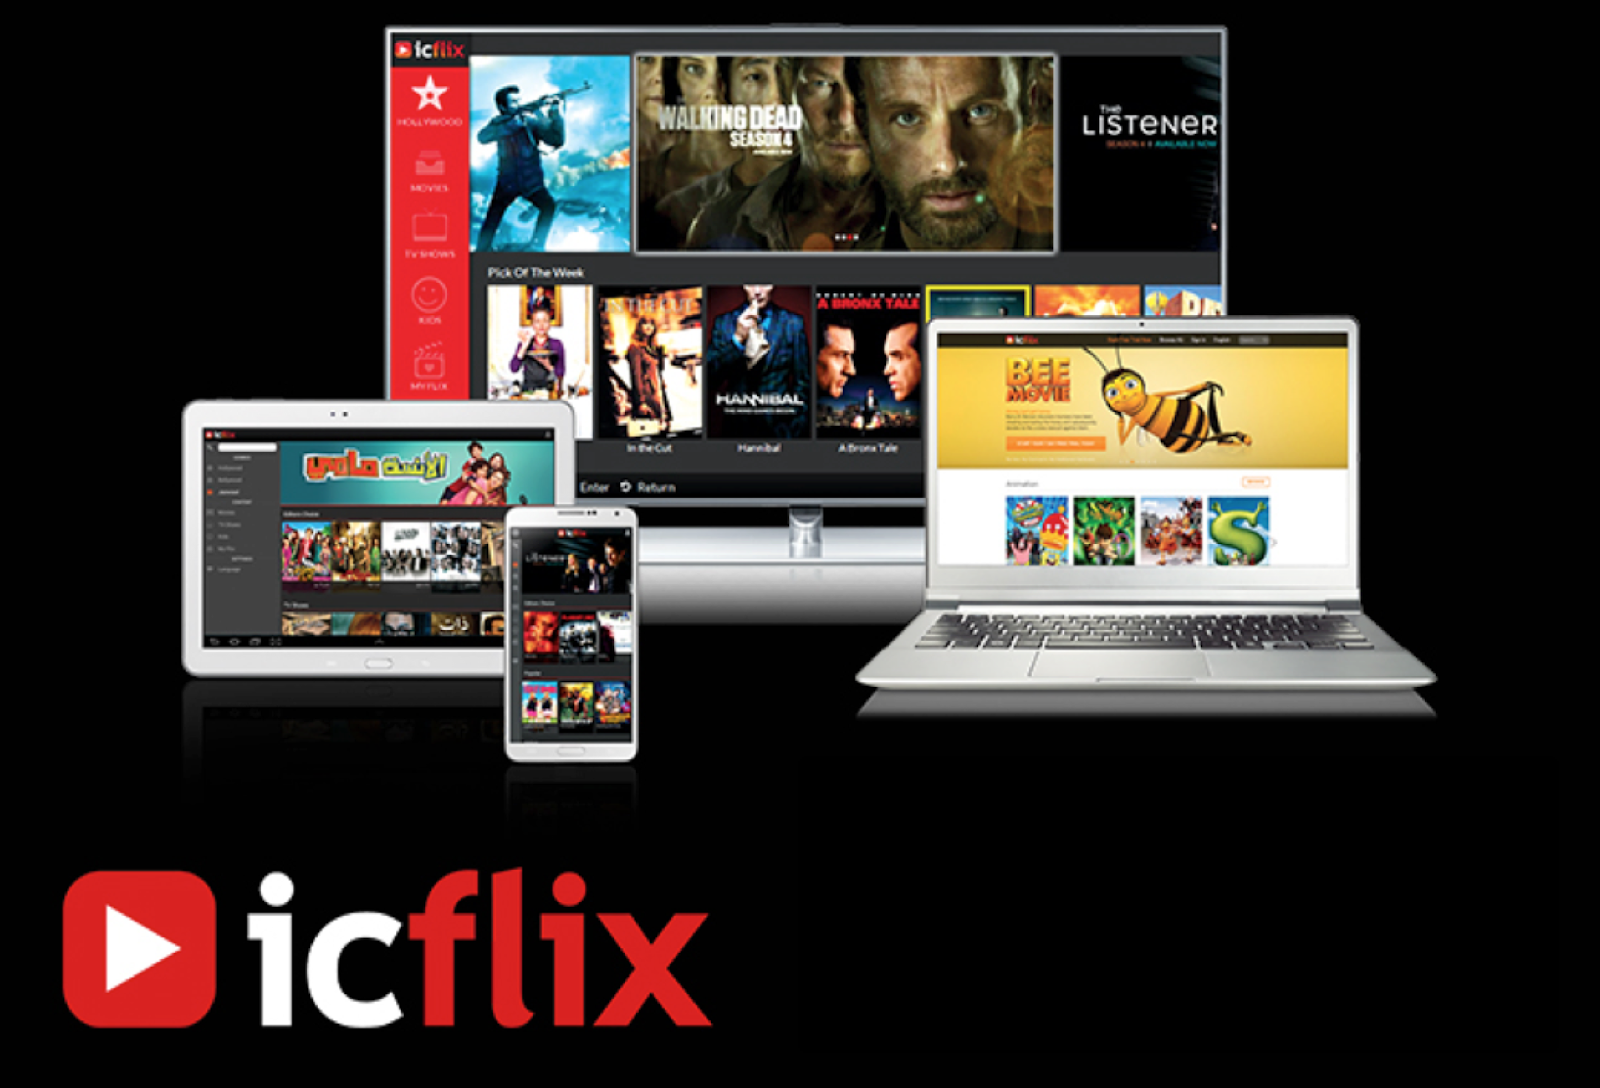 Icflix now available on Xbox One